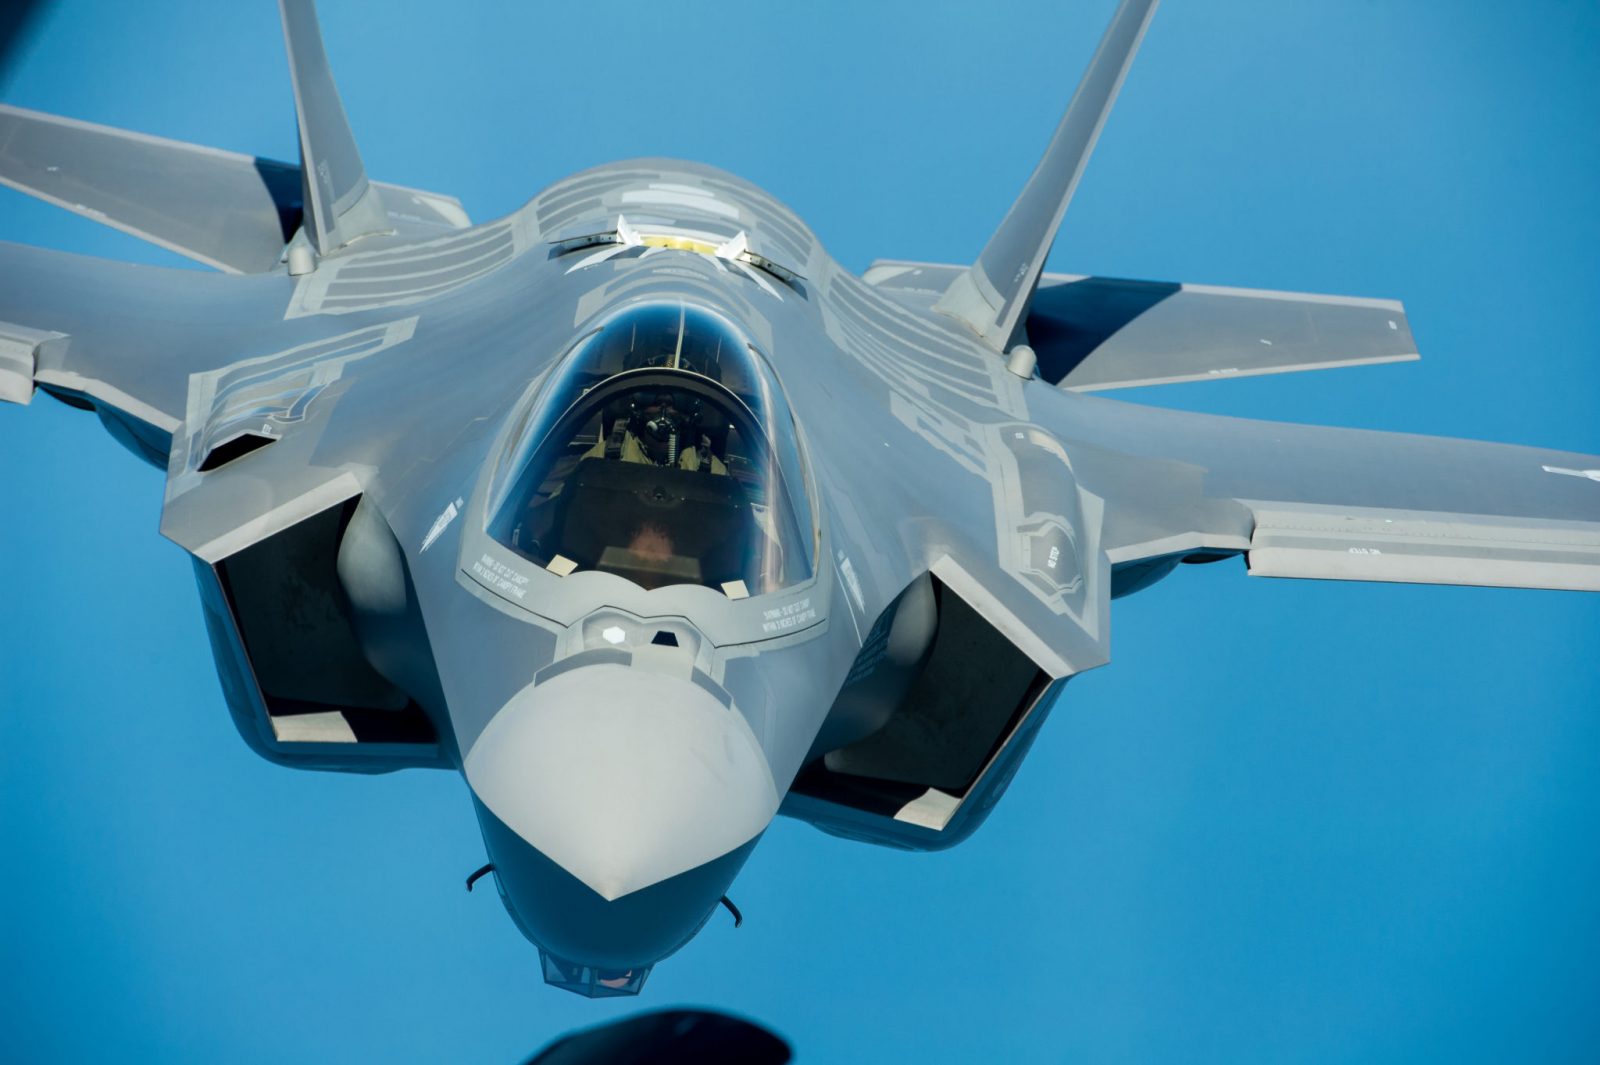 Importance of F-35 to Israel